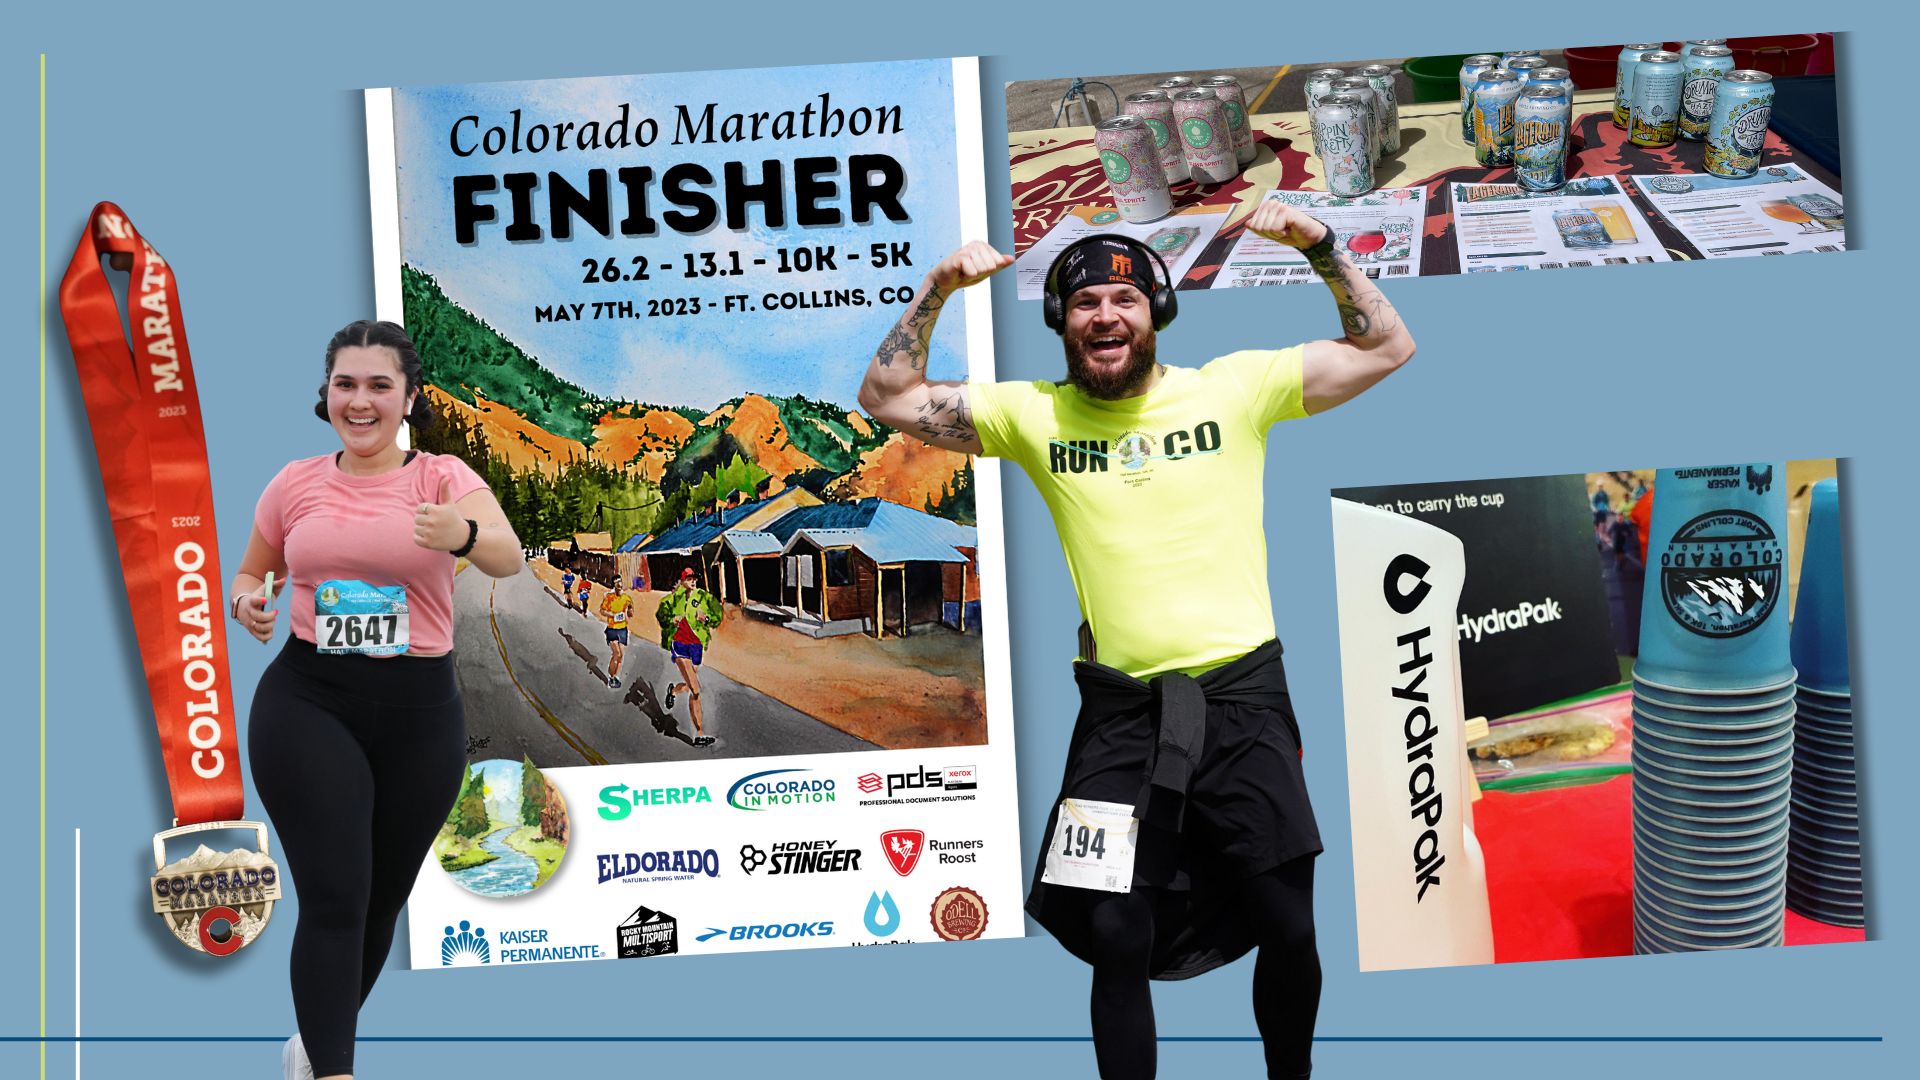 Swag for participants of the Colorado Marathon in Fort Collins